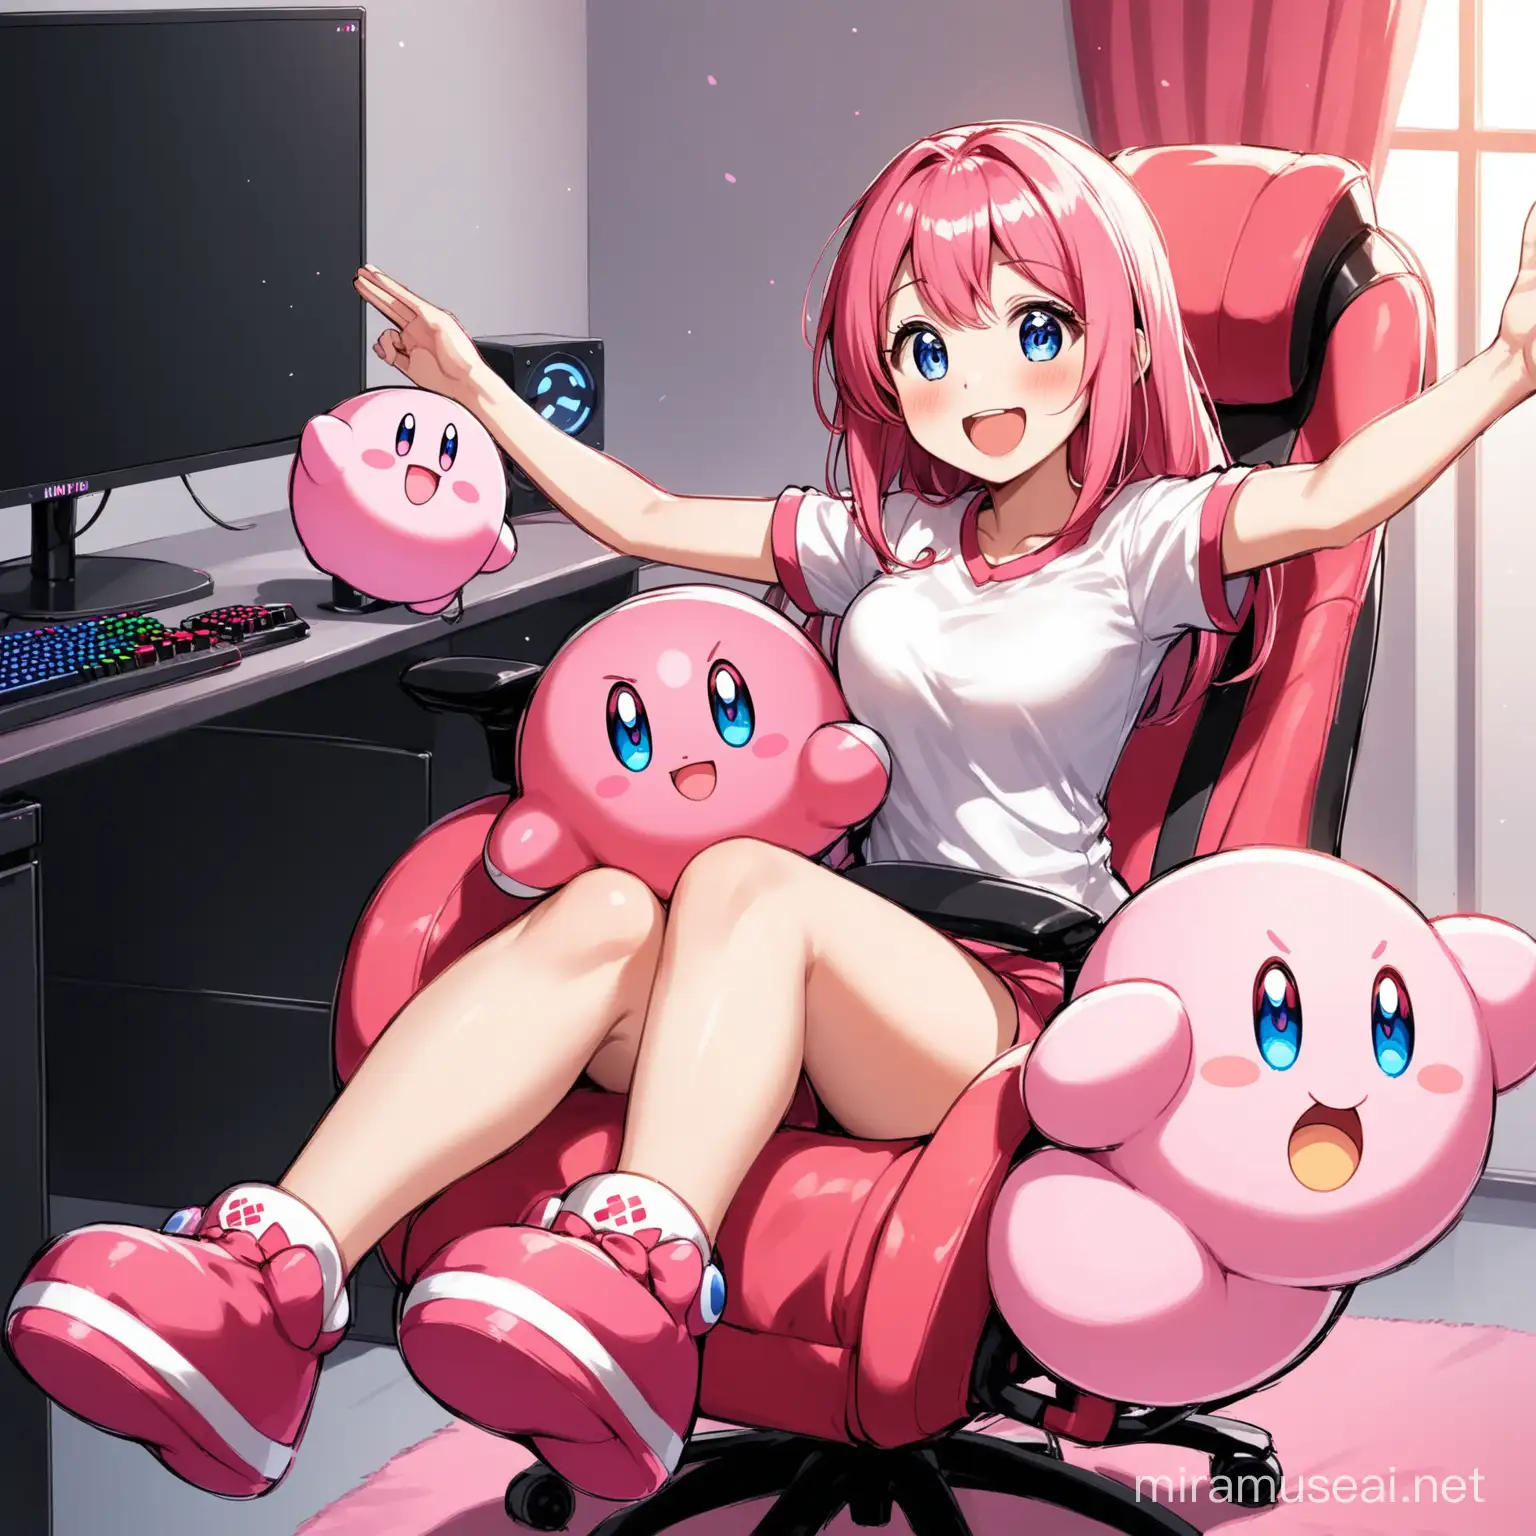 Excited Girl Wins Video Game Joyful EGirl Celebrates with Kirby Plushie